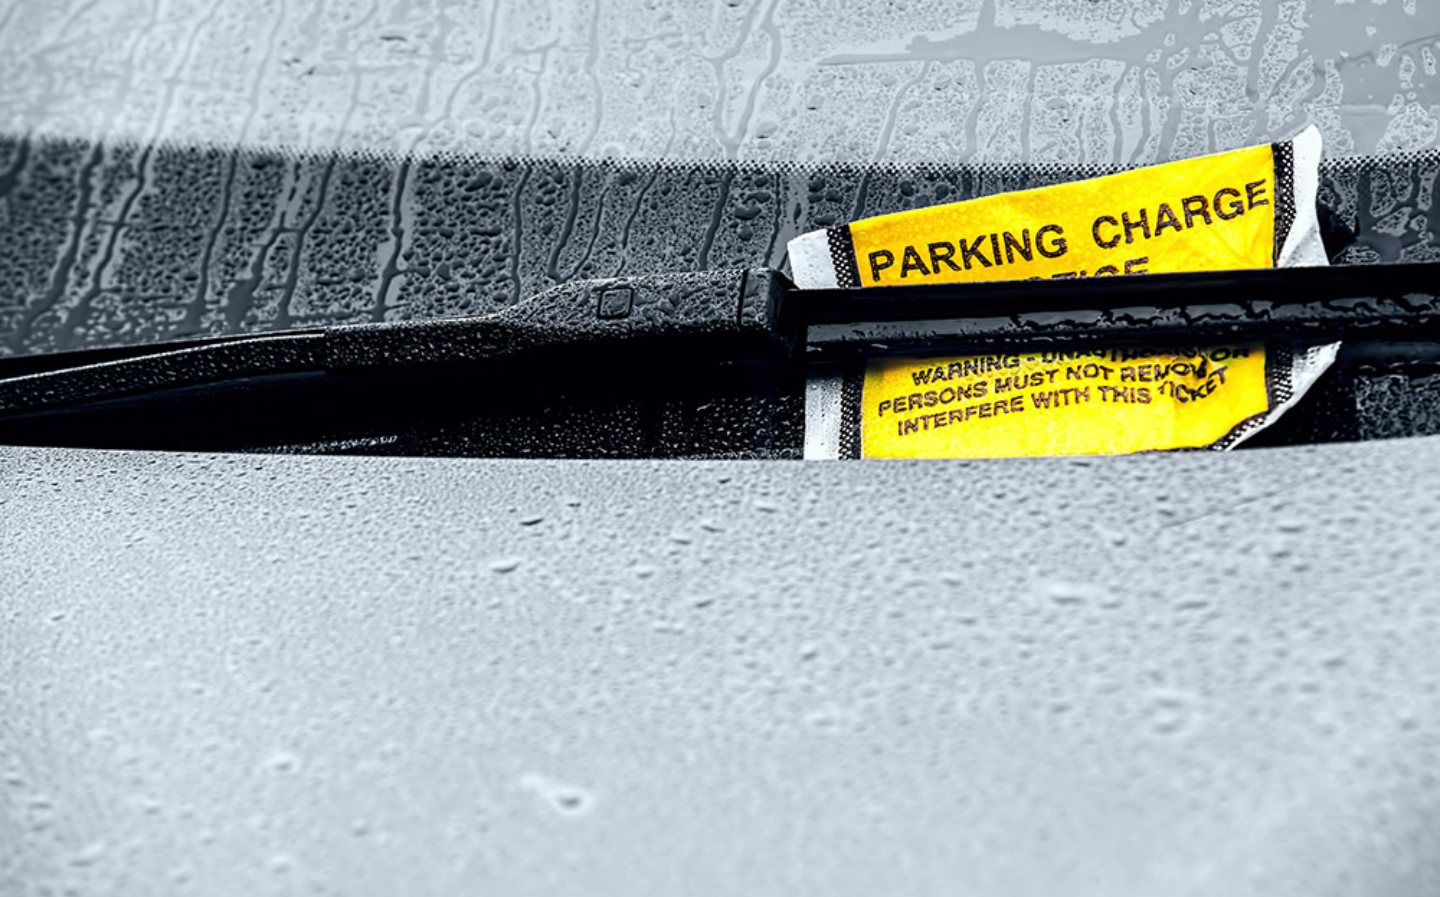 Penalty charge notification parking ticket